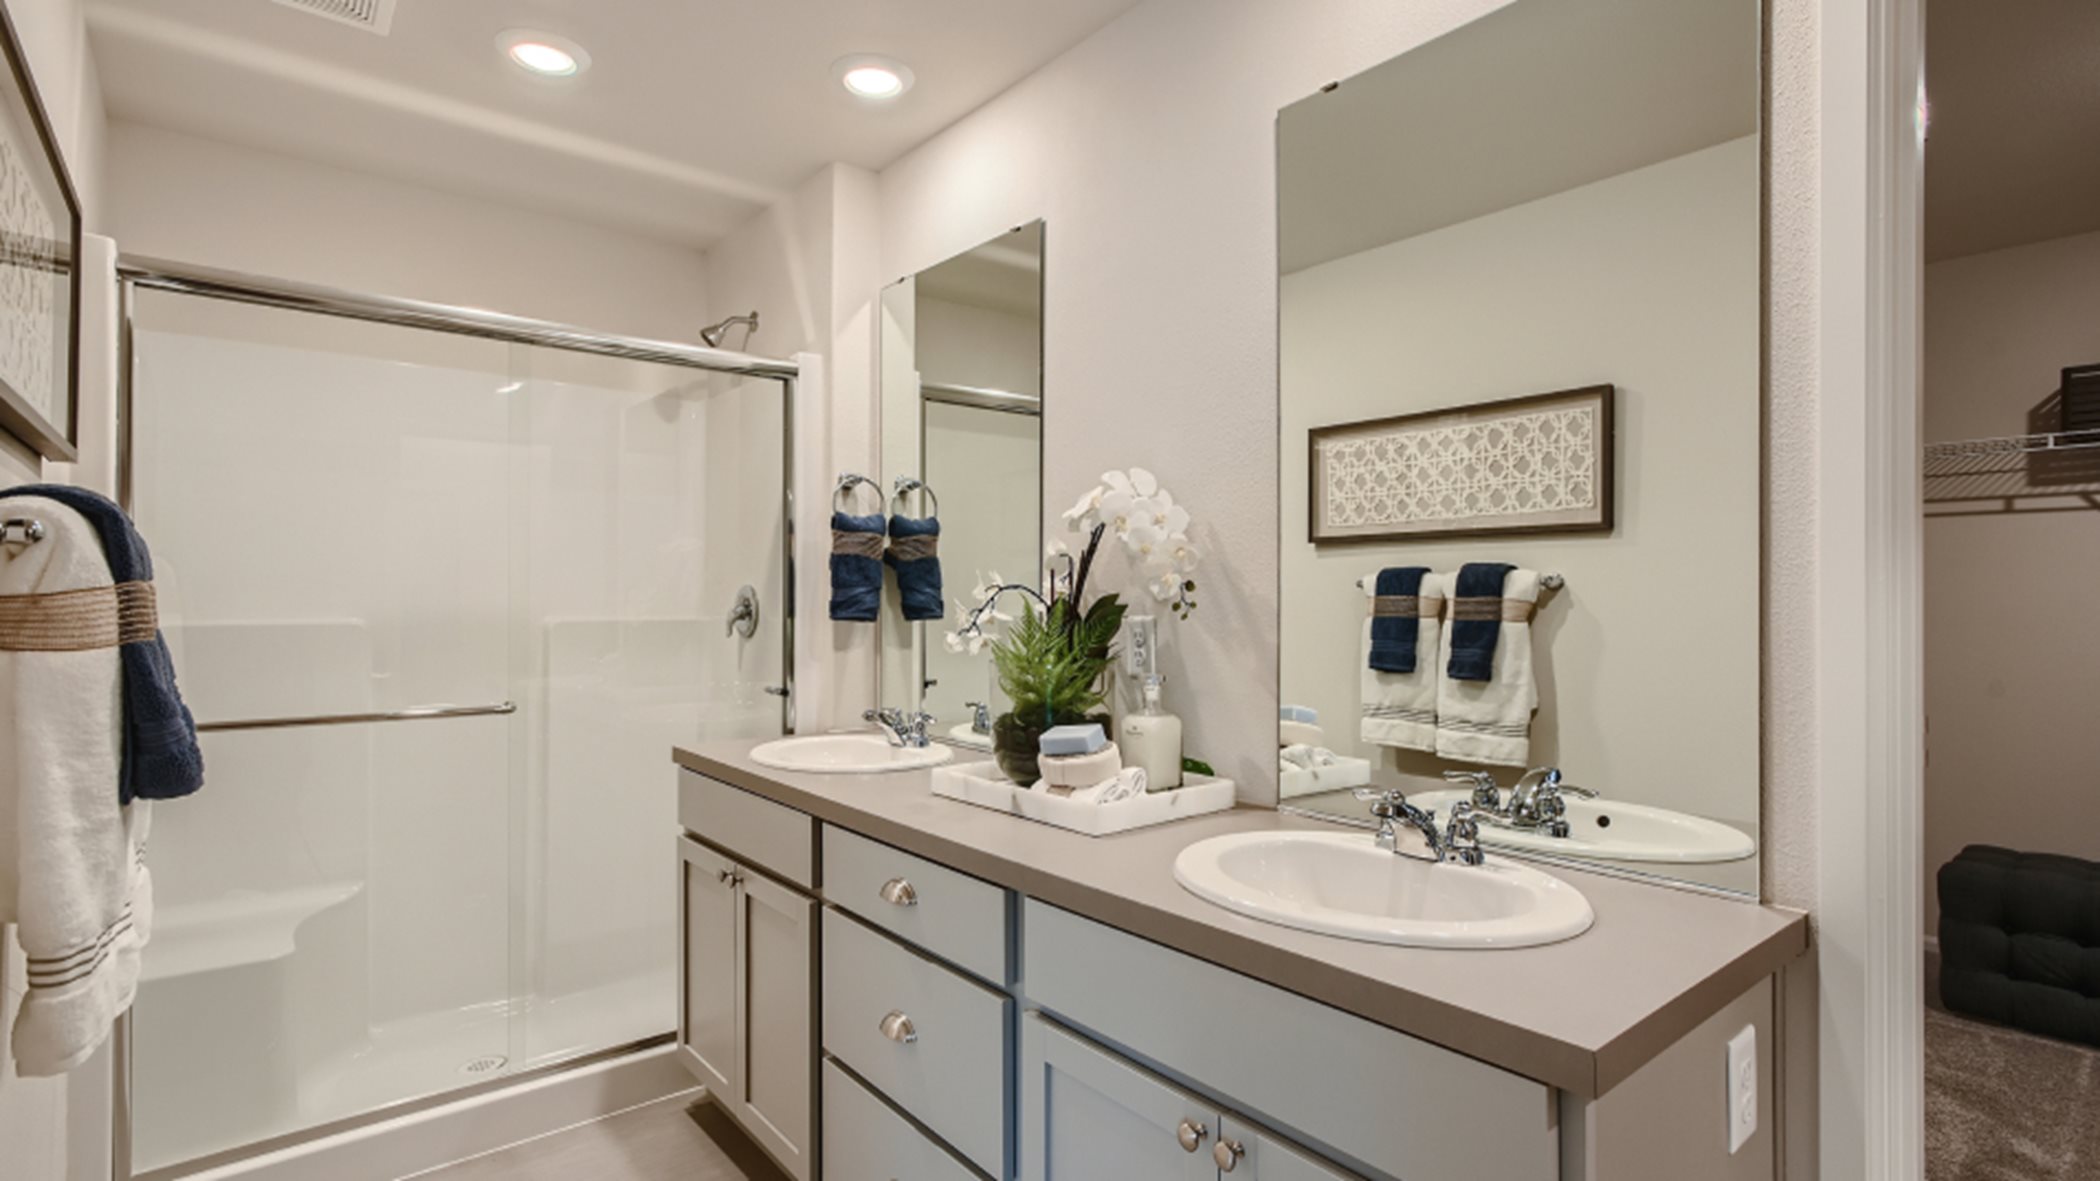 Owner's suite bathroom with dual sinks